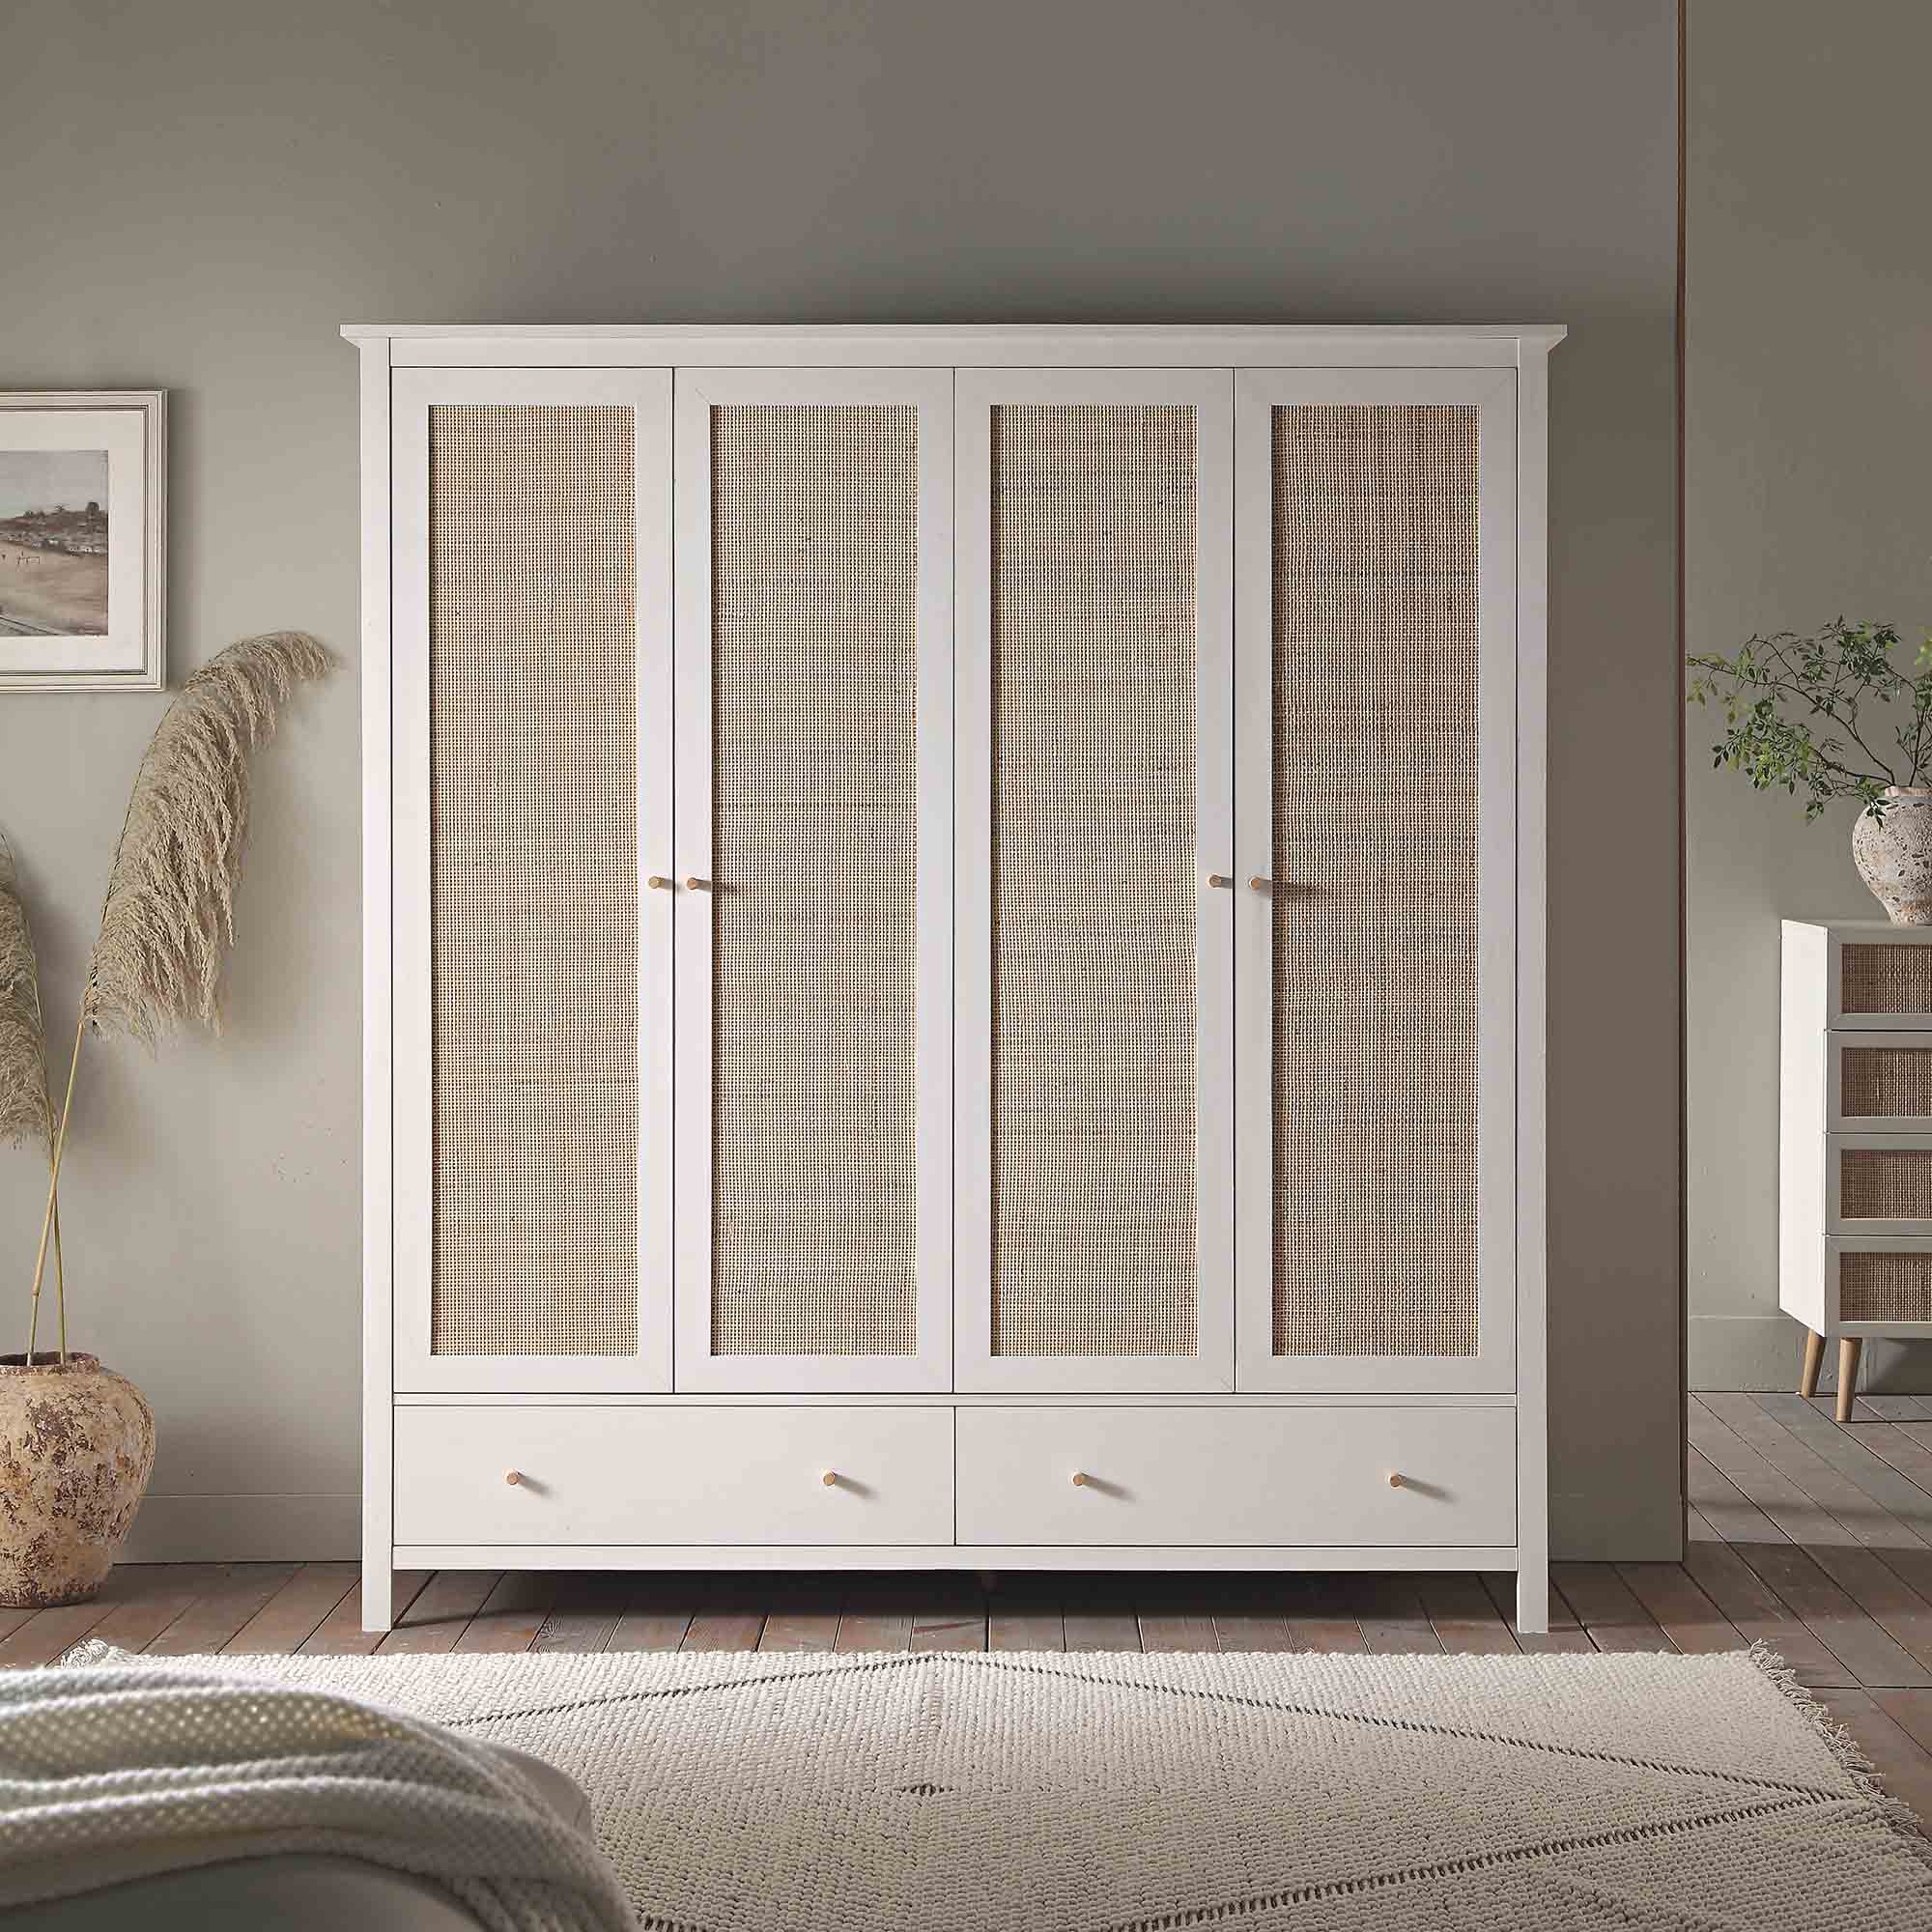 Frances Rattan 4-Door Wardrobe with 2 Drawers, White